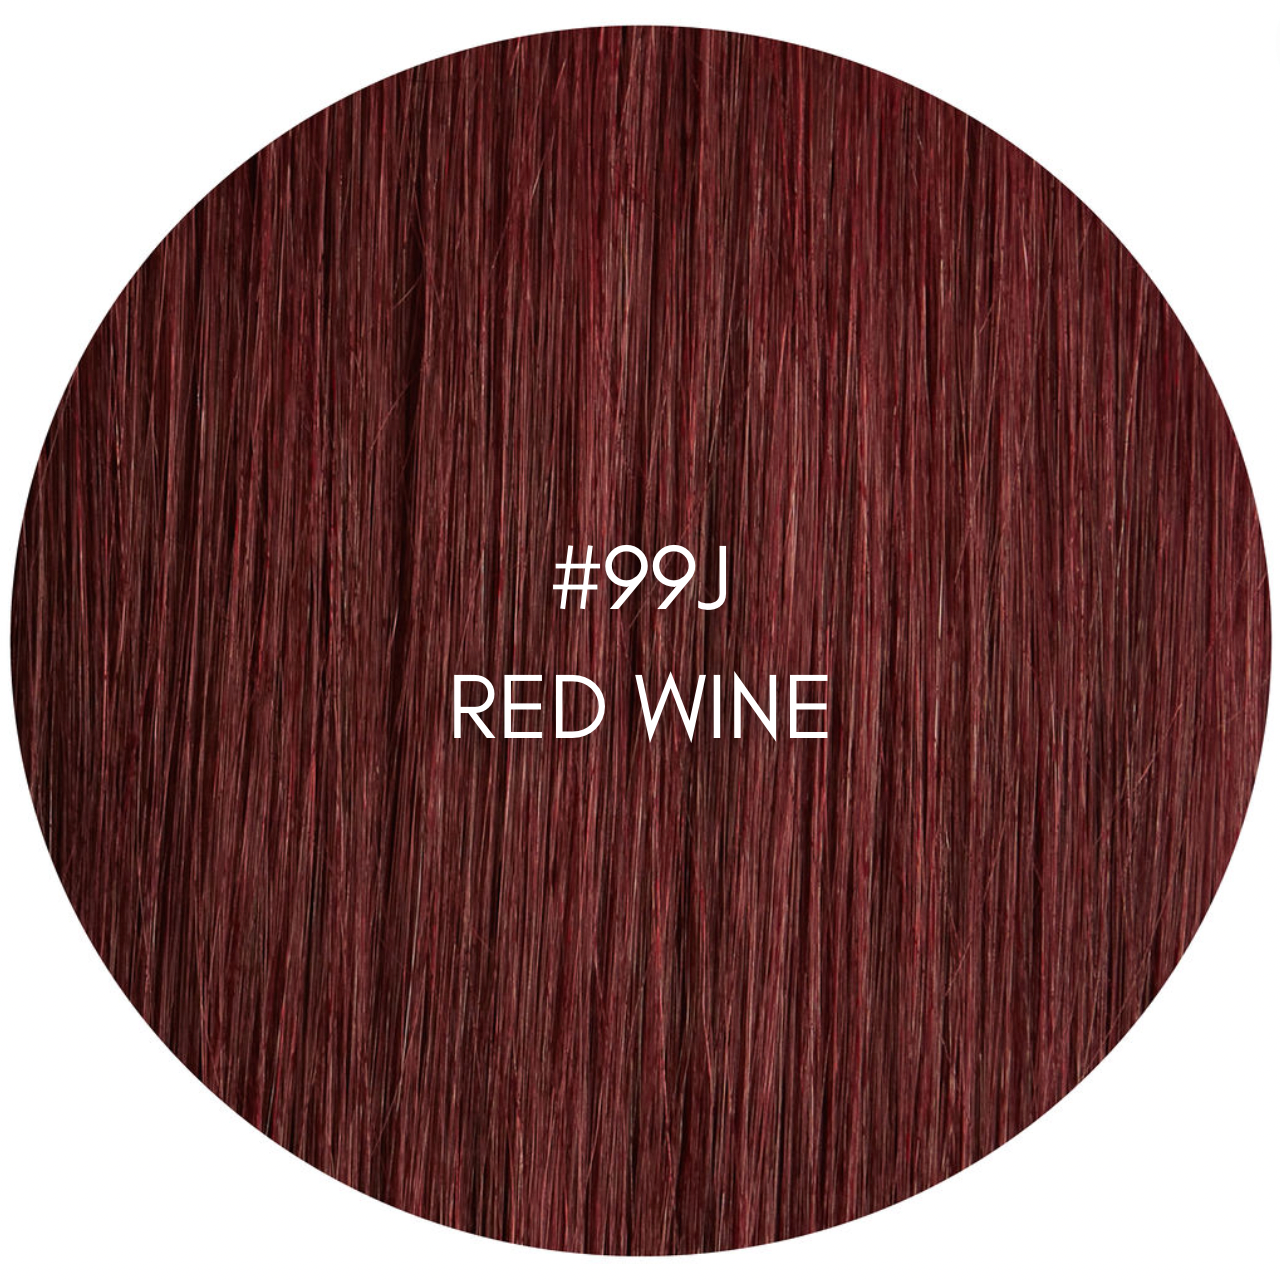 Invisi wefts - WHOLESALE